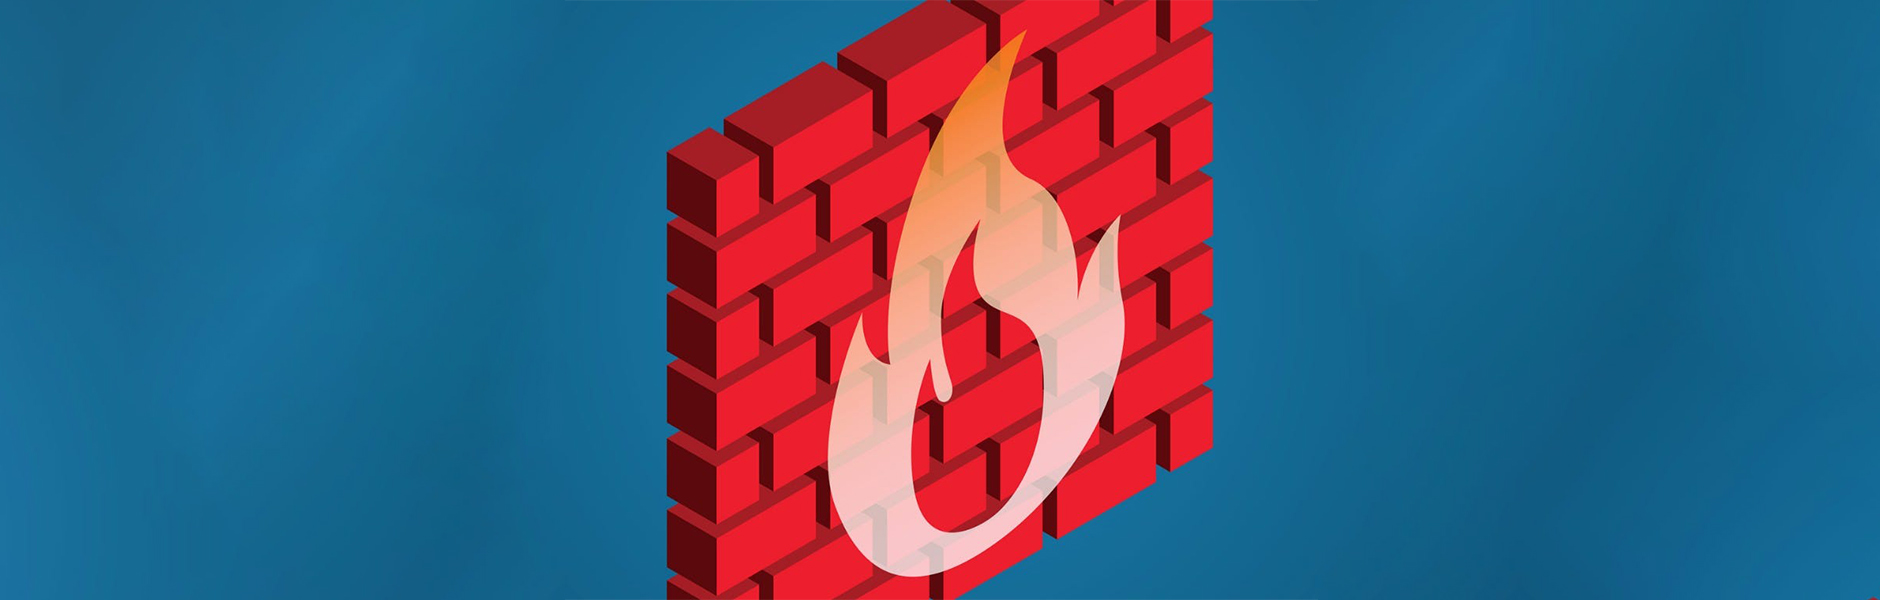 What is a Firewall? Why is it important?